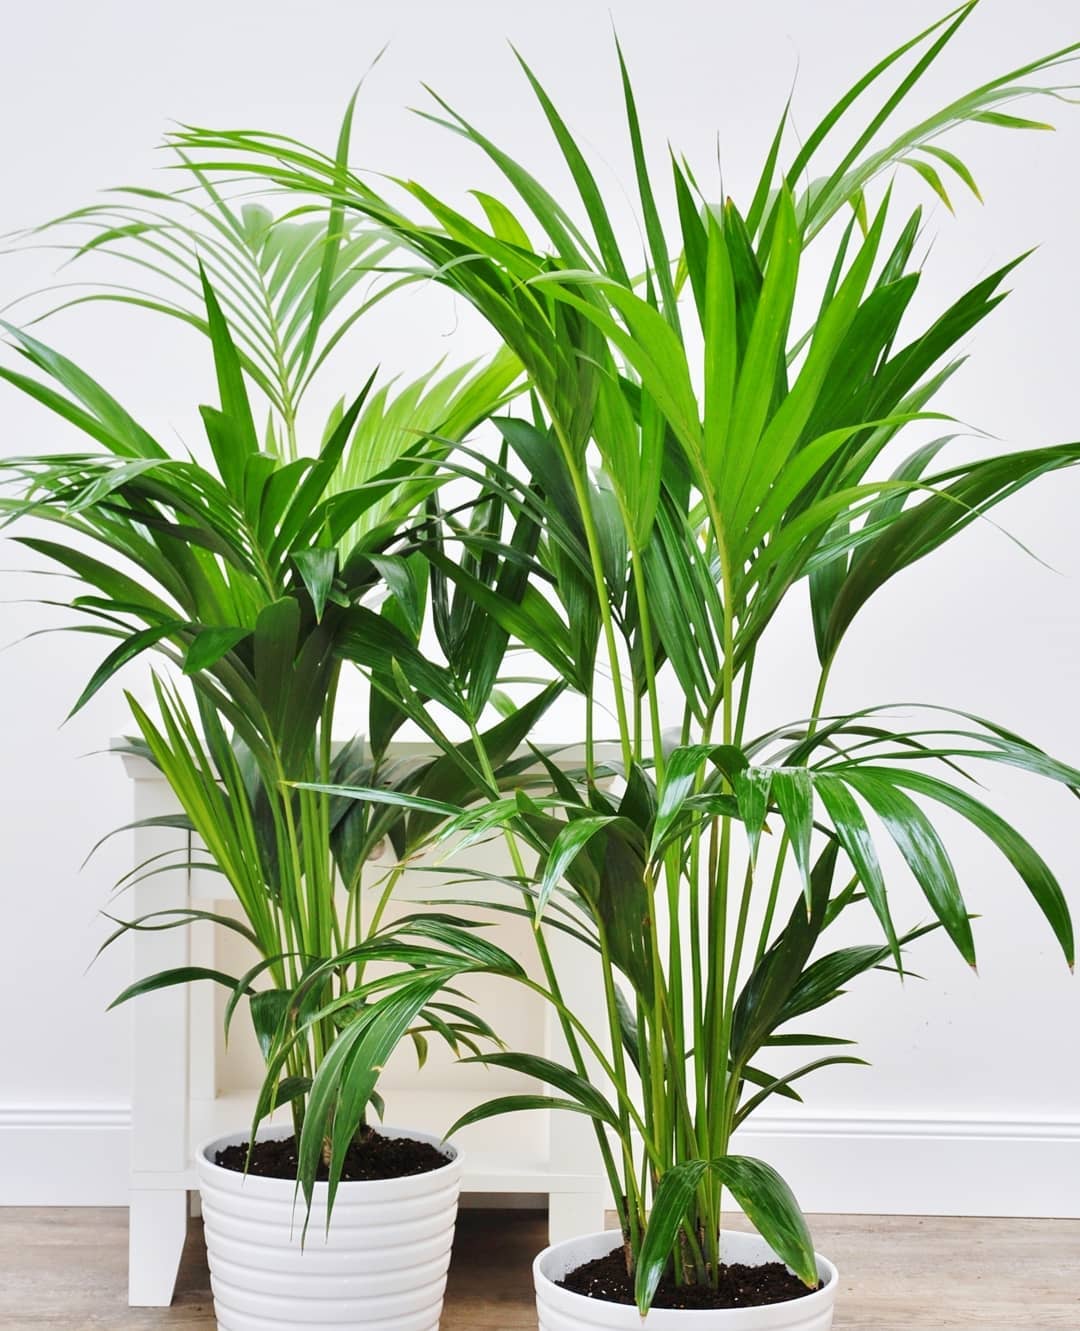 personalized kentia palm care: water, light, nutrients | greg app